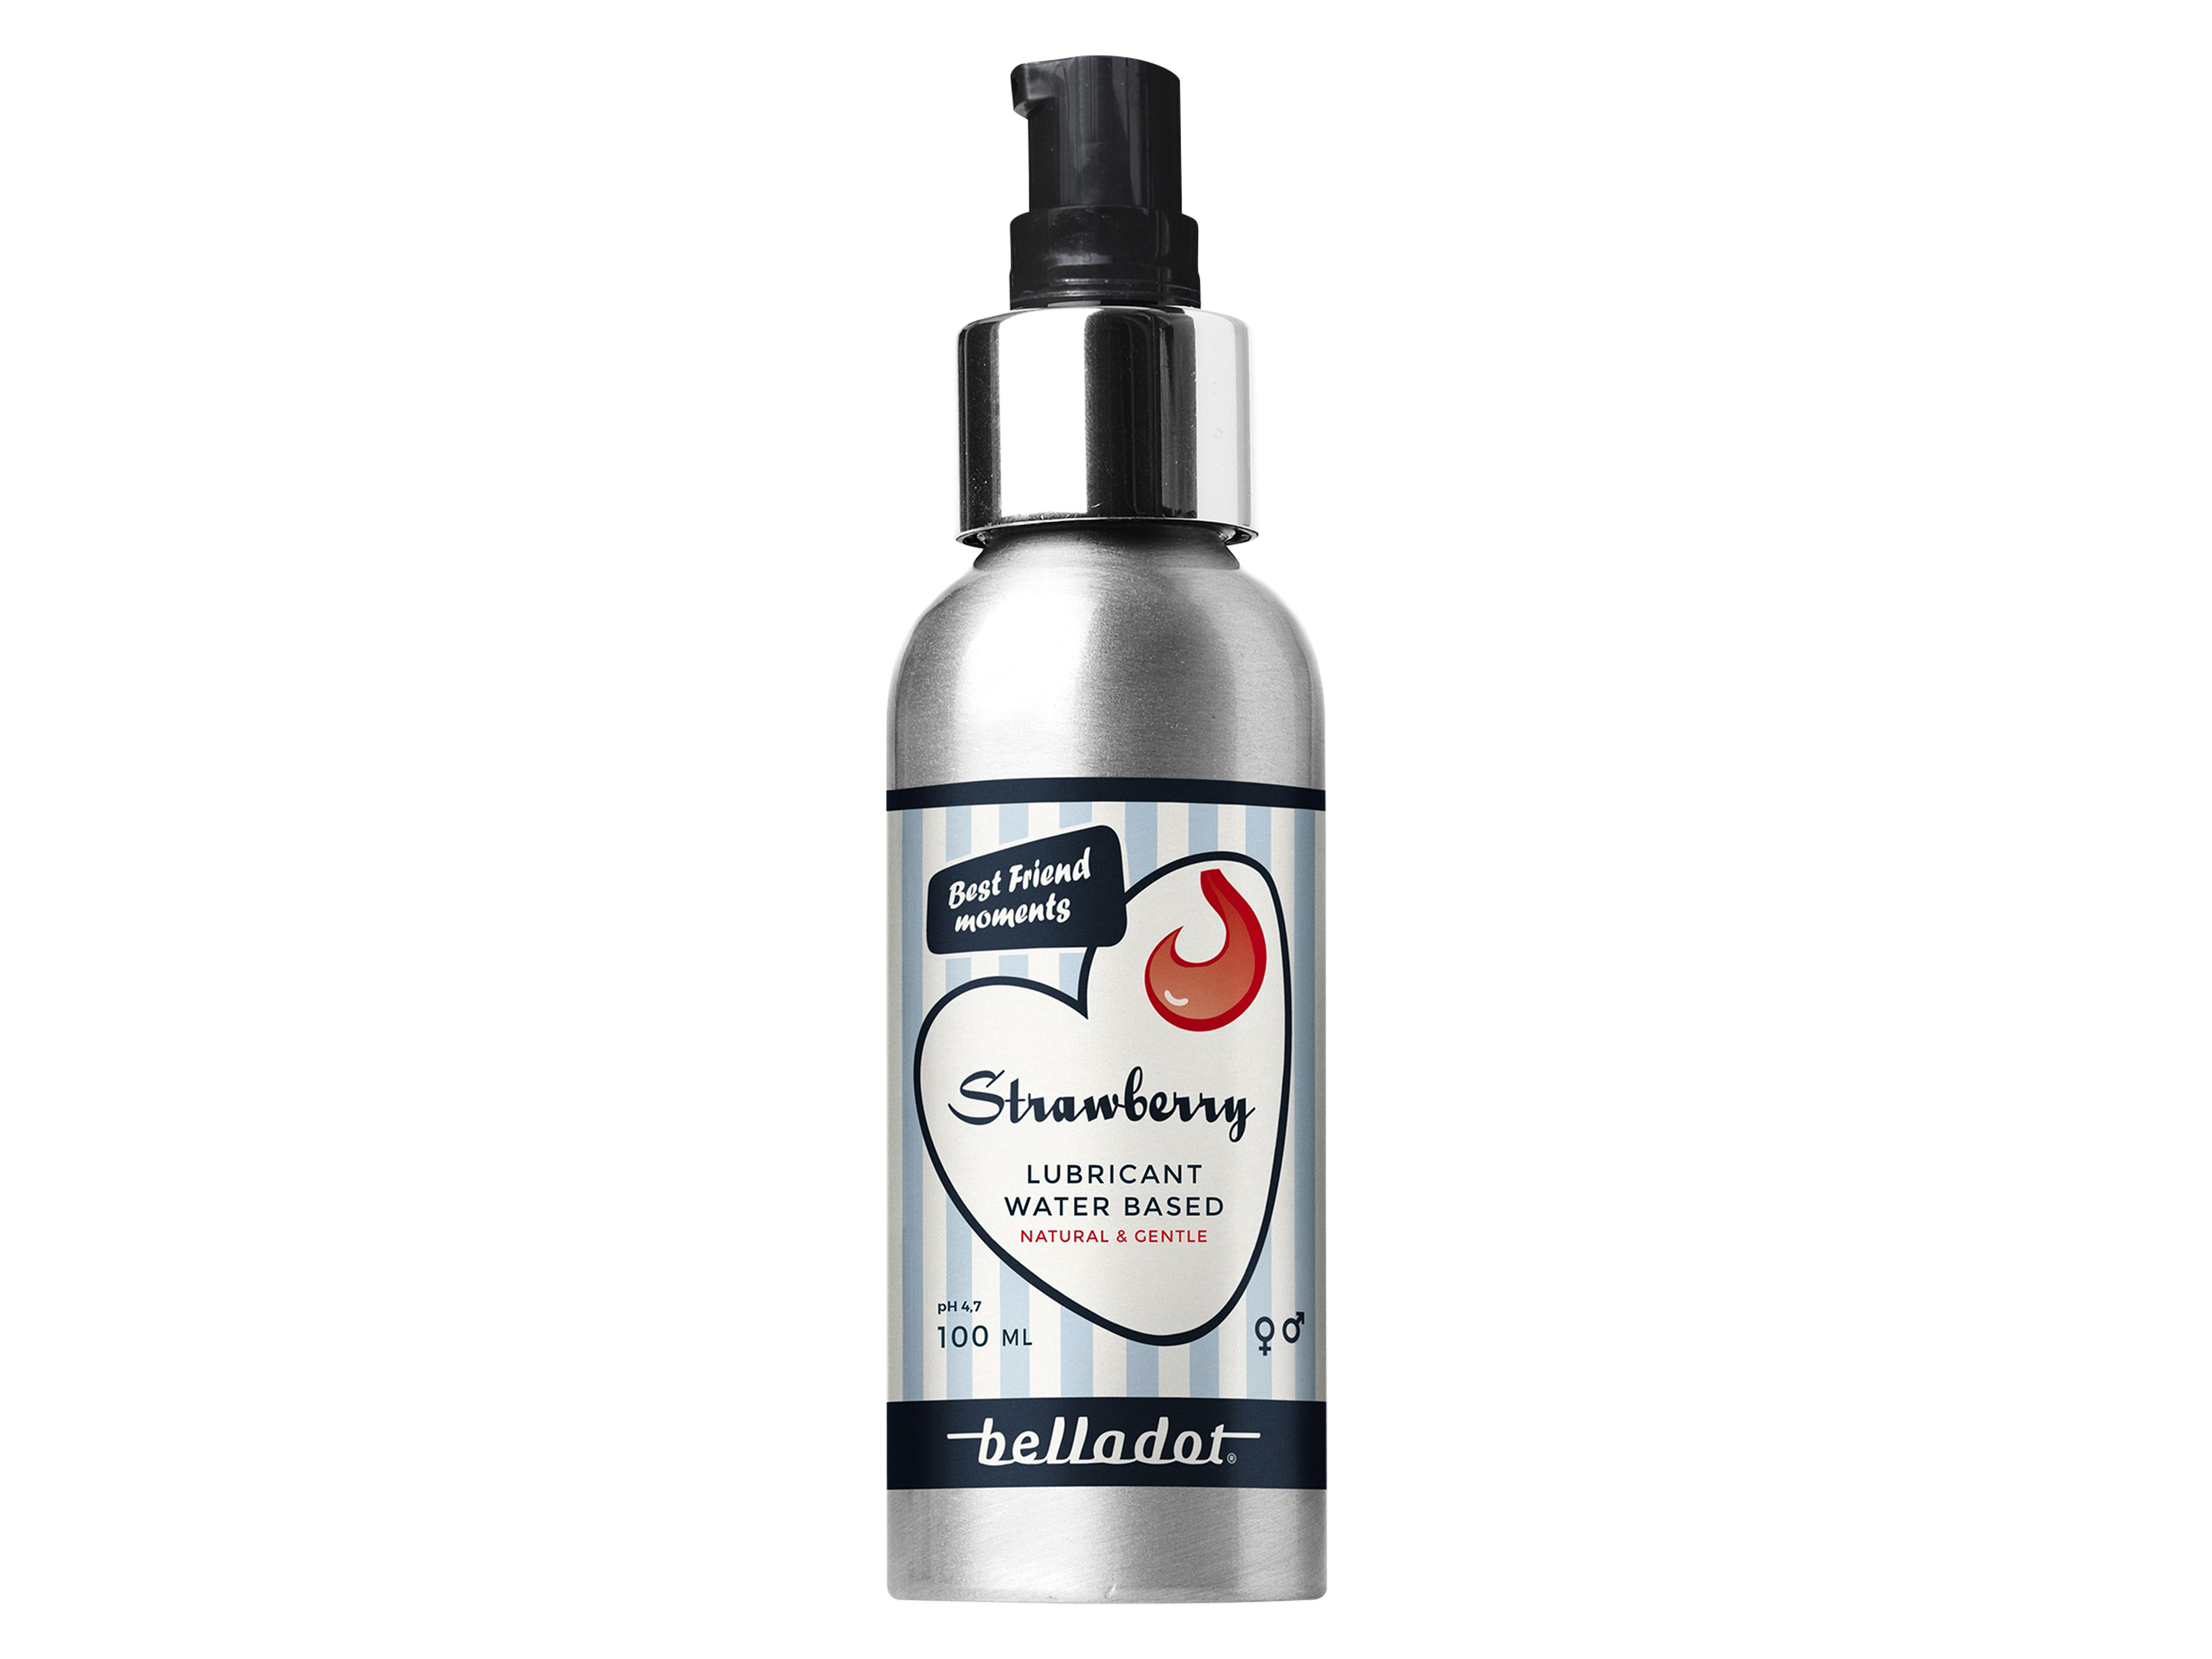 Belladot Strawberry Lubricant Water Based, 100 ml